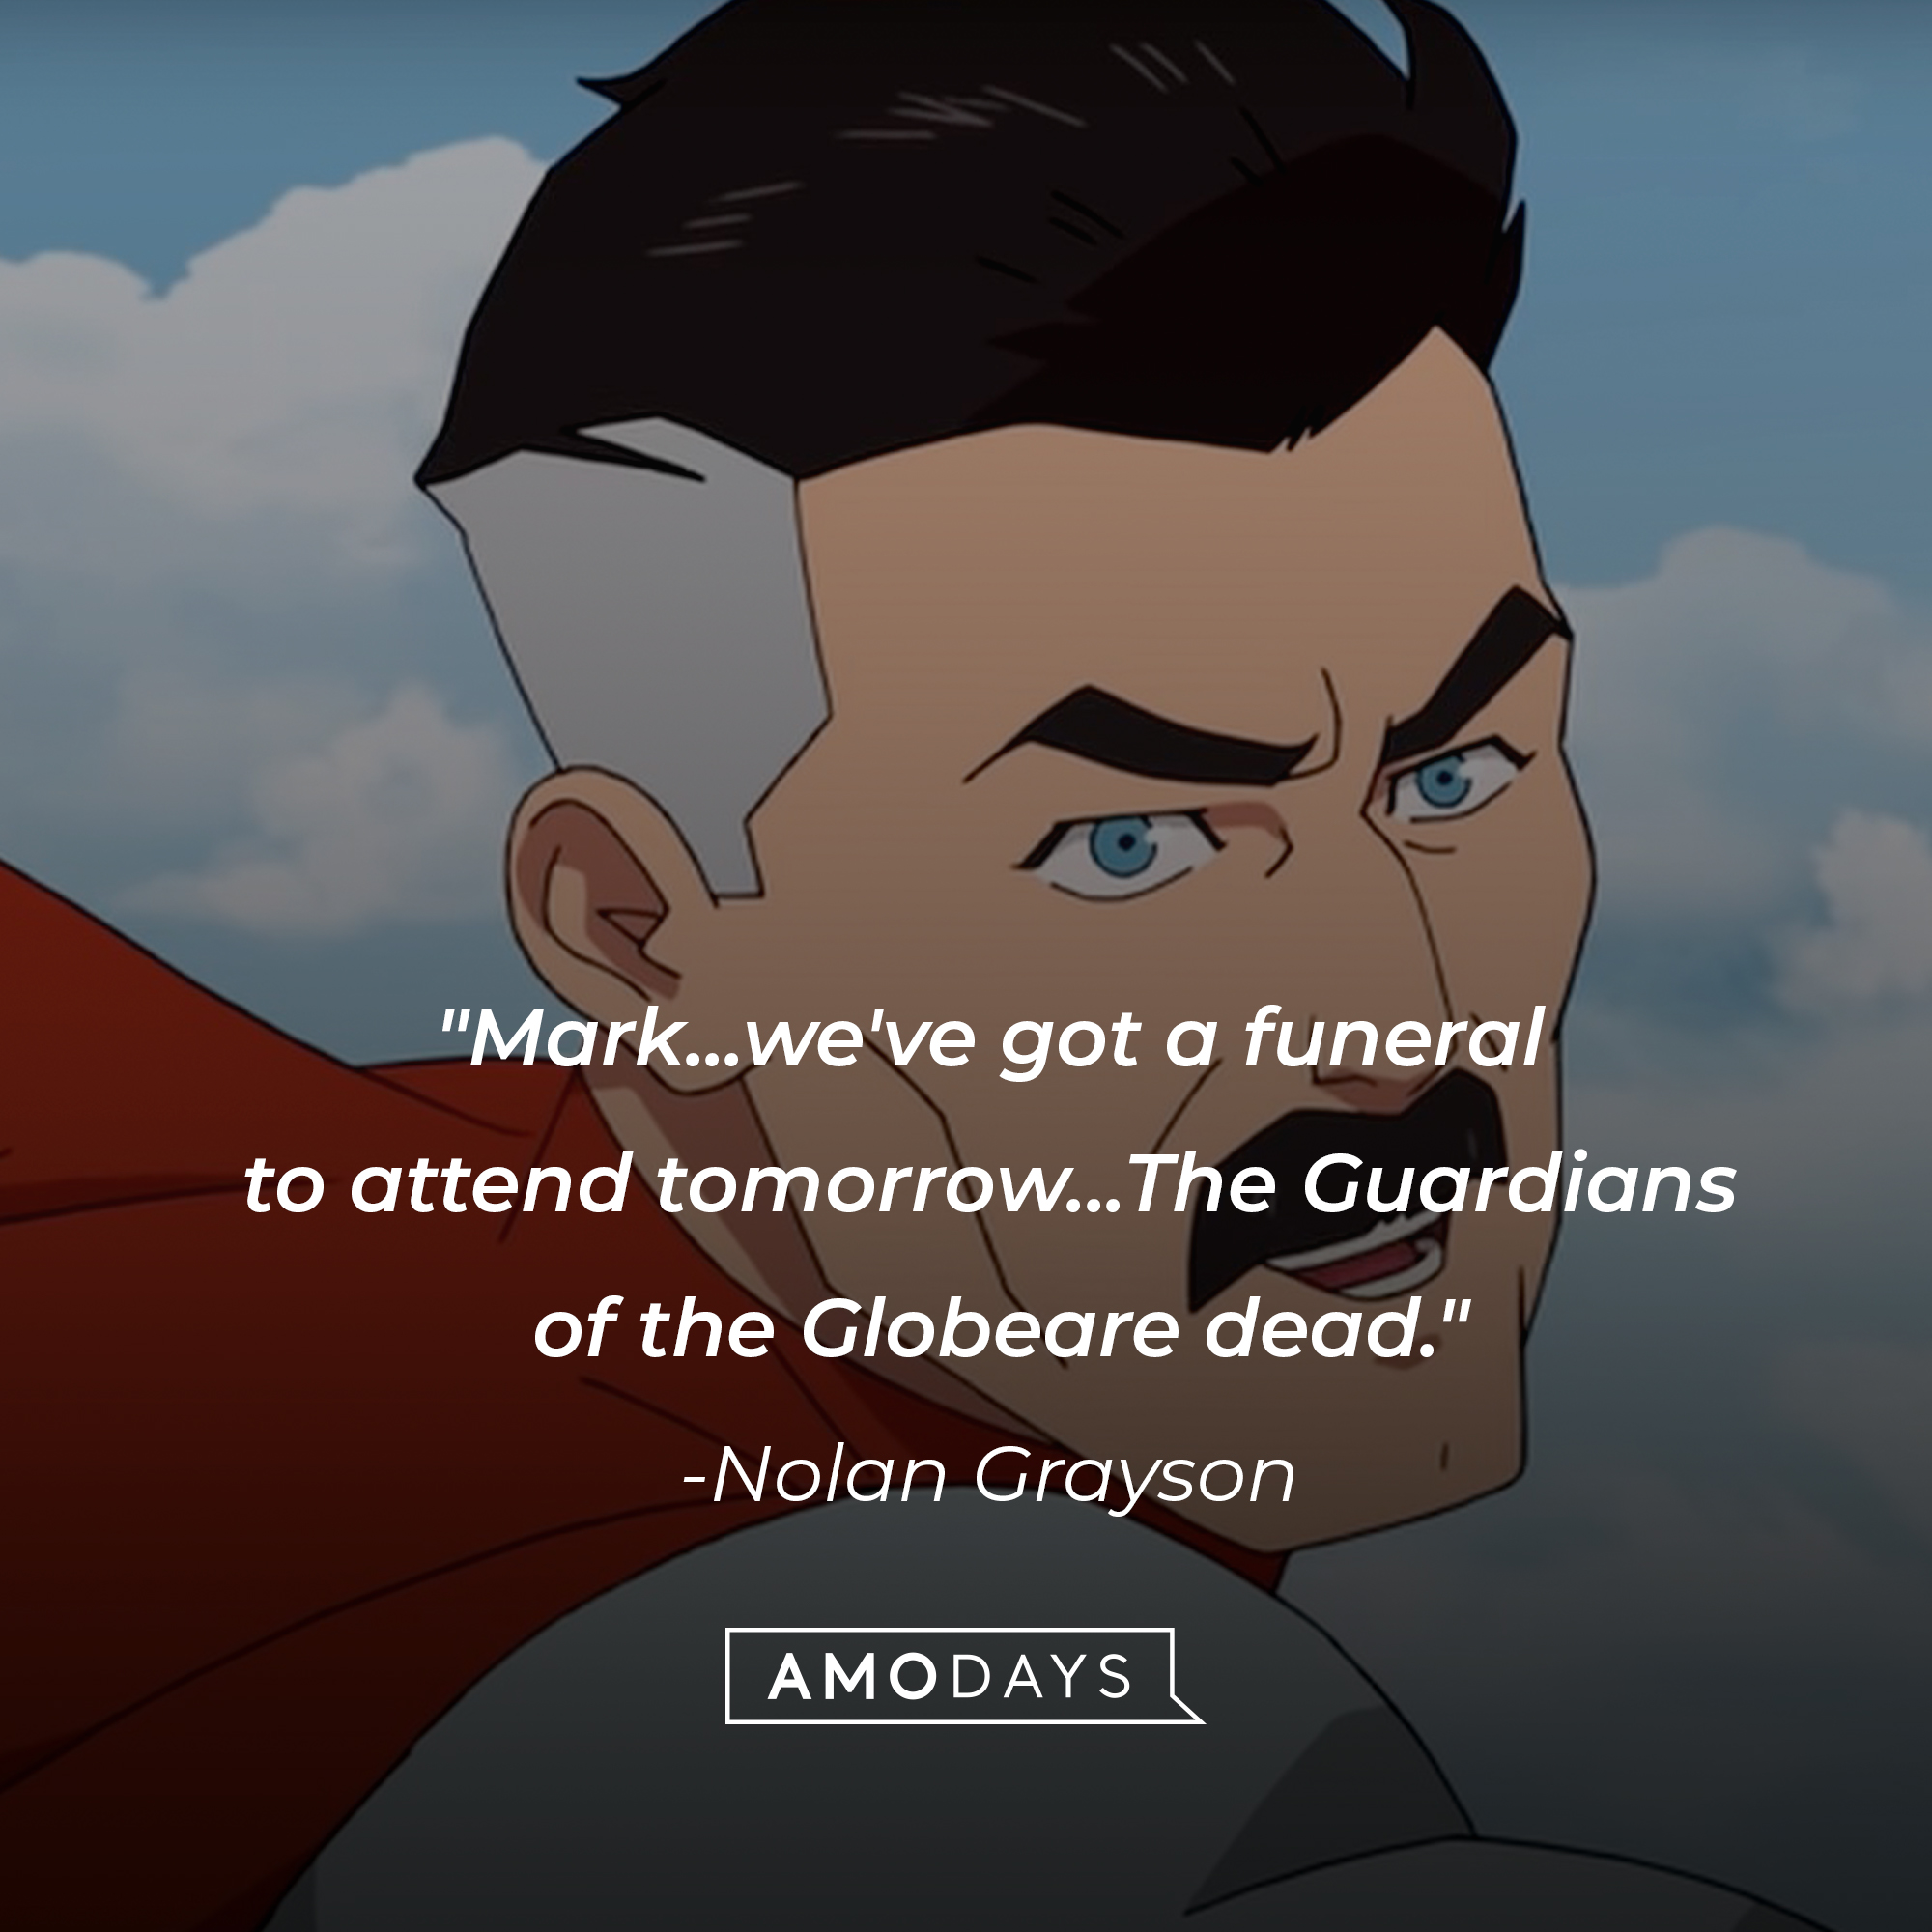 Nolan Grayson's quote: "Mark... we've got a funeral to attend tomorrow... The Guardians of the Globe are dead." | Source: Facebook.com/Invincibleuniverse